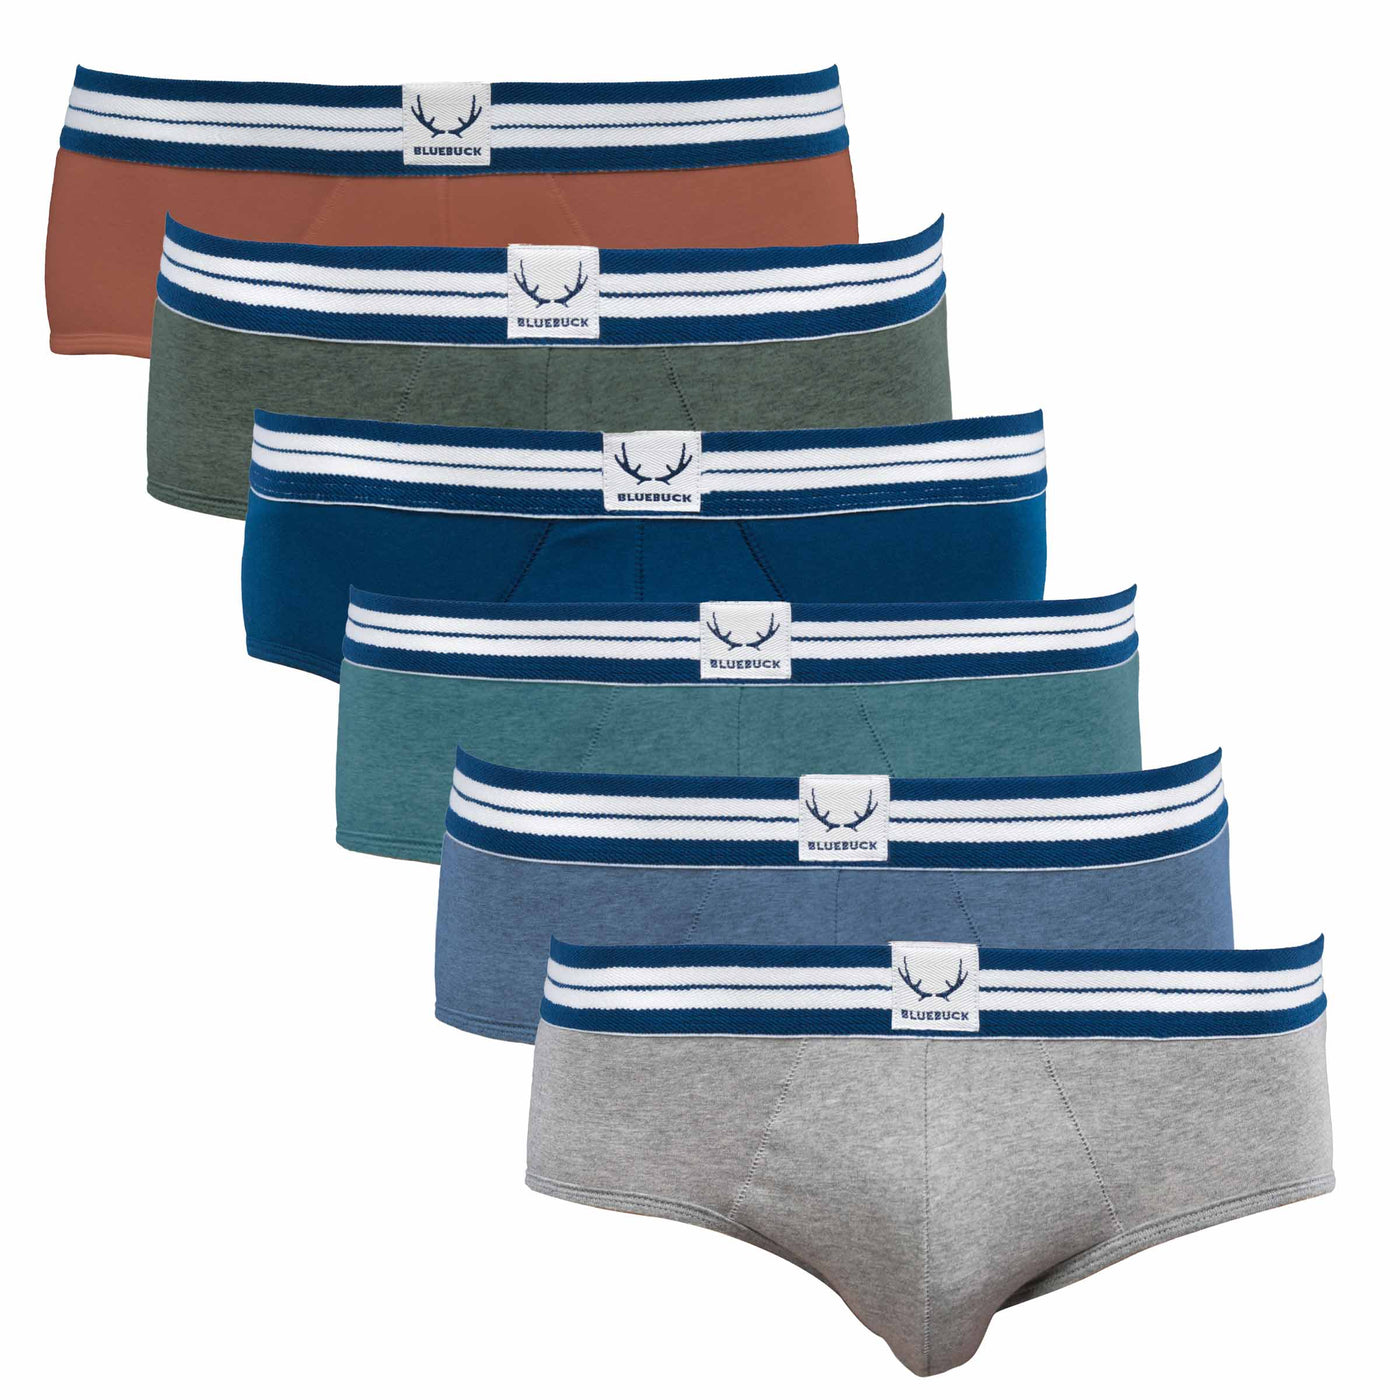 Pack of 6 organic cotton classic briefs 